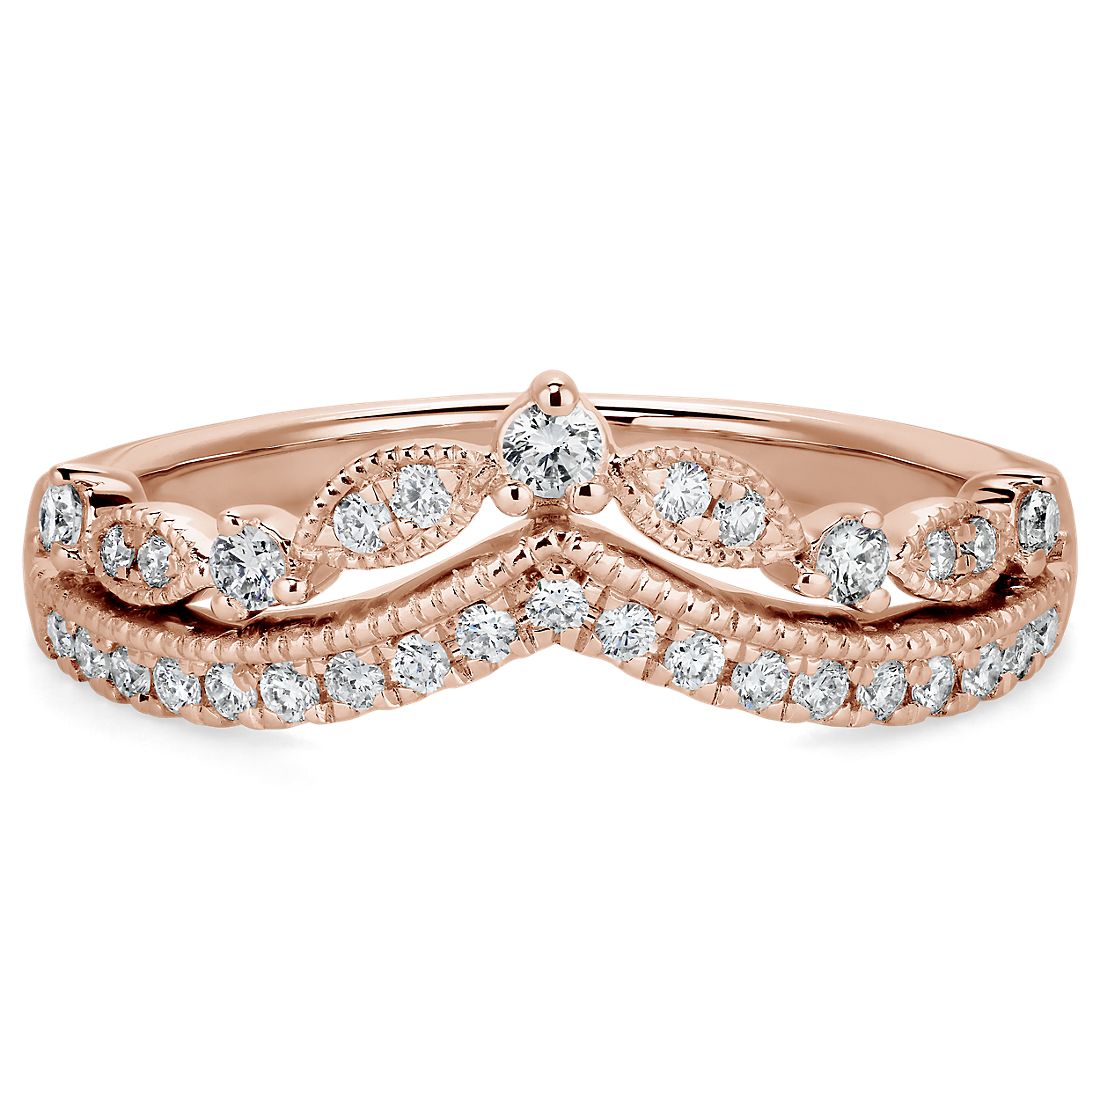 Regal Curved Diamond Ring in 18k Rose Gold (1/4 ct. tw.)